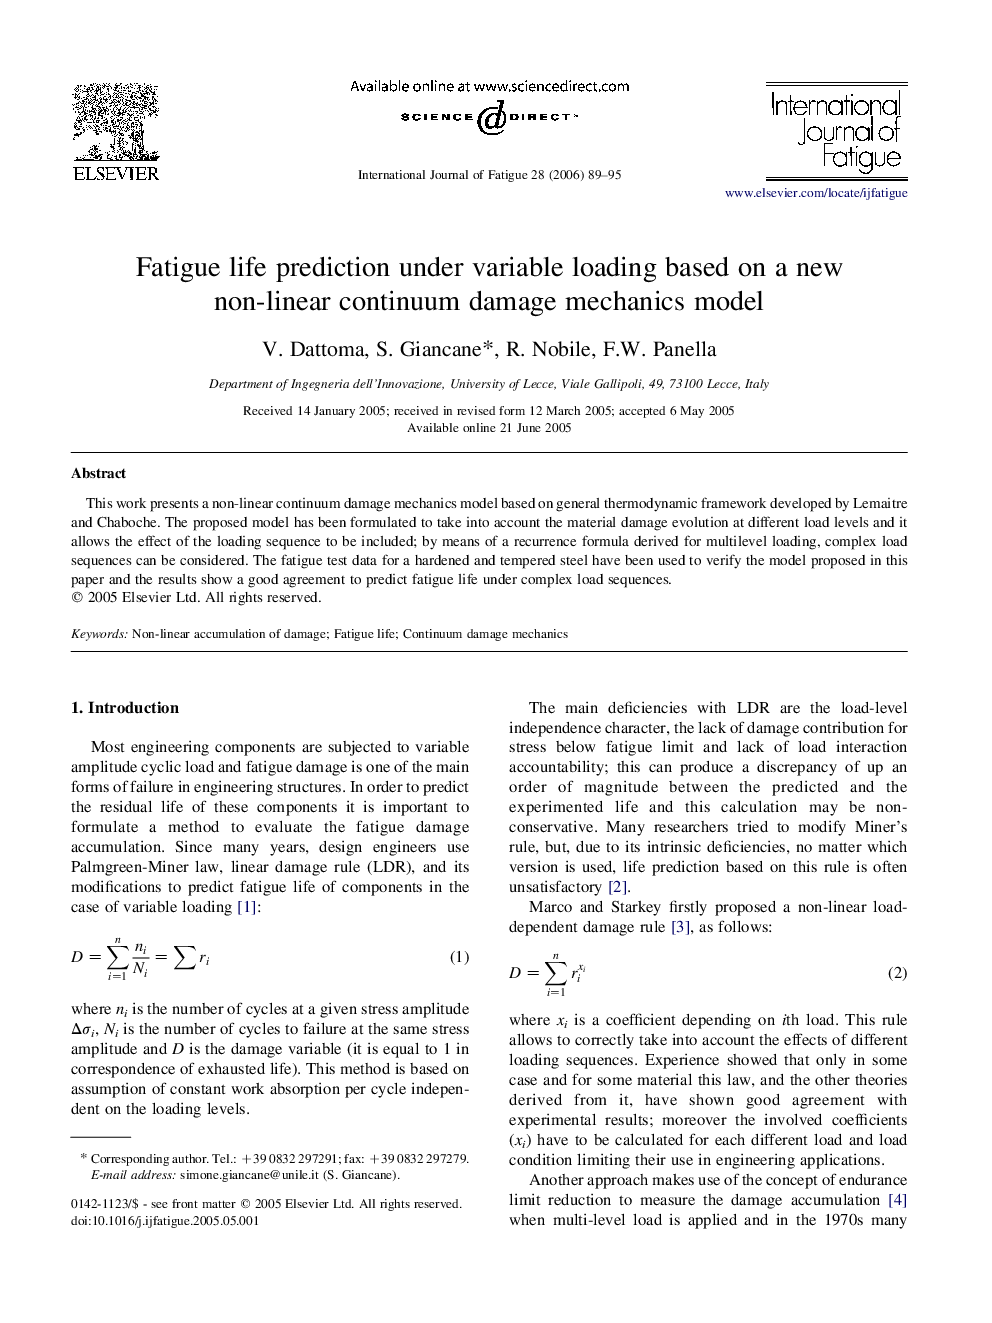 Fatigue life prediction under variable loading based on a new non-linear continuum damage mechanics model